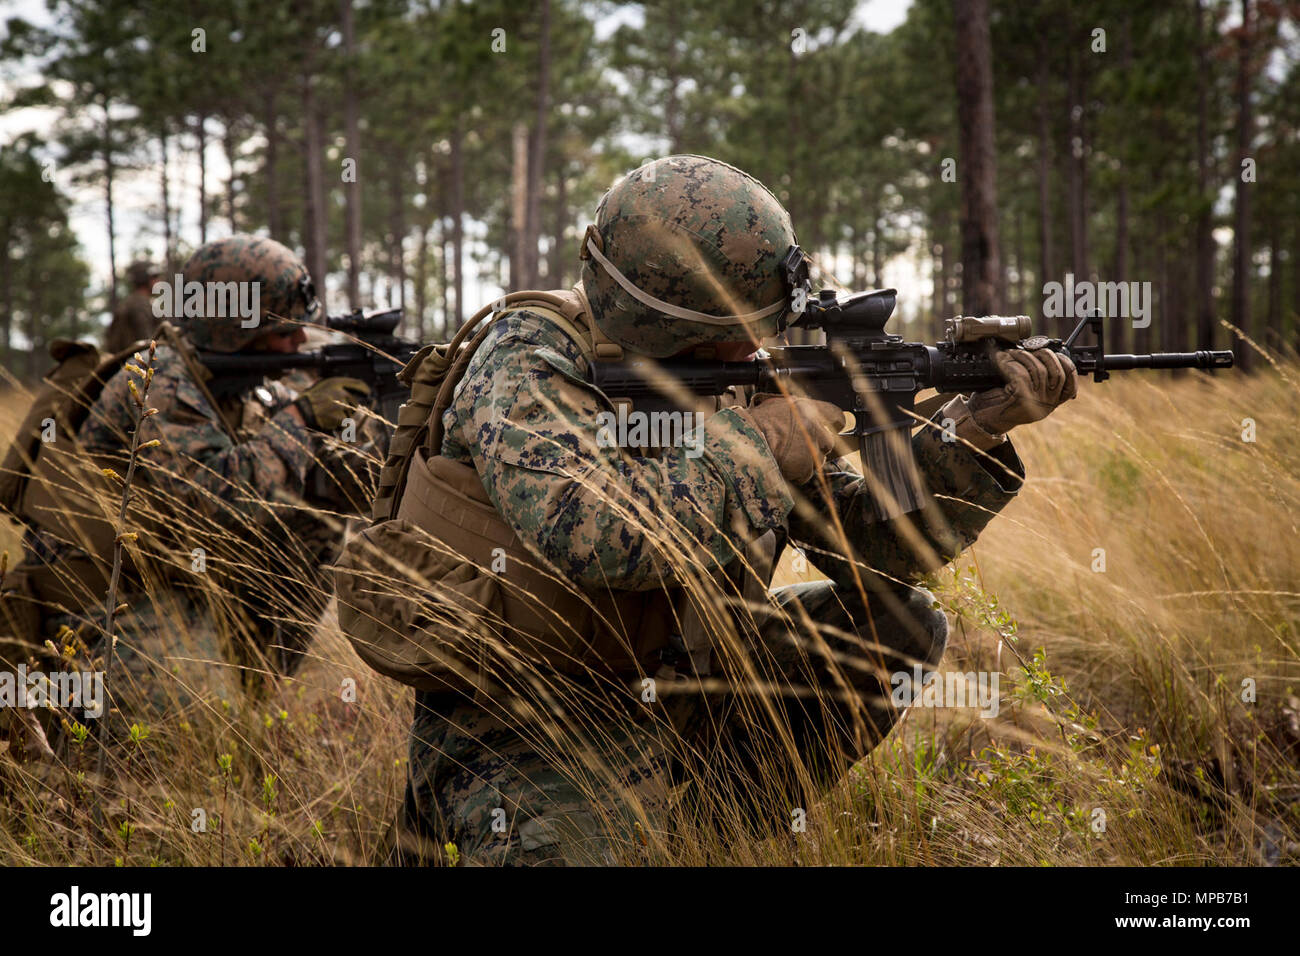 U.S. Marines attached to Advanced Infantry Training Battalion, School of Infantry-East (SOI-E), fire their M4A1 carbine during a combined arms exercise at Camp Lejeune, N.C., April 7, 2017. The mission of SOI-E is to train entry-level and advanced level Marines in the skills required of an Infantry Marine for the operating forces. Stock Photo